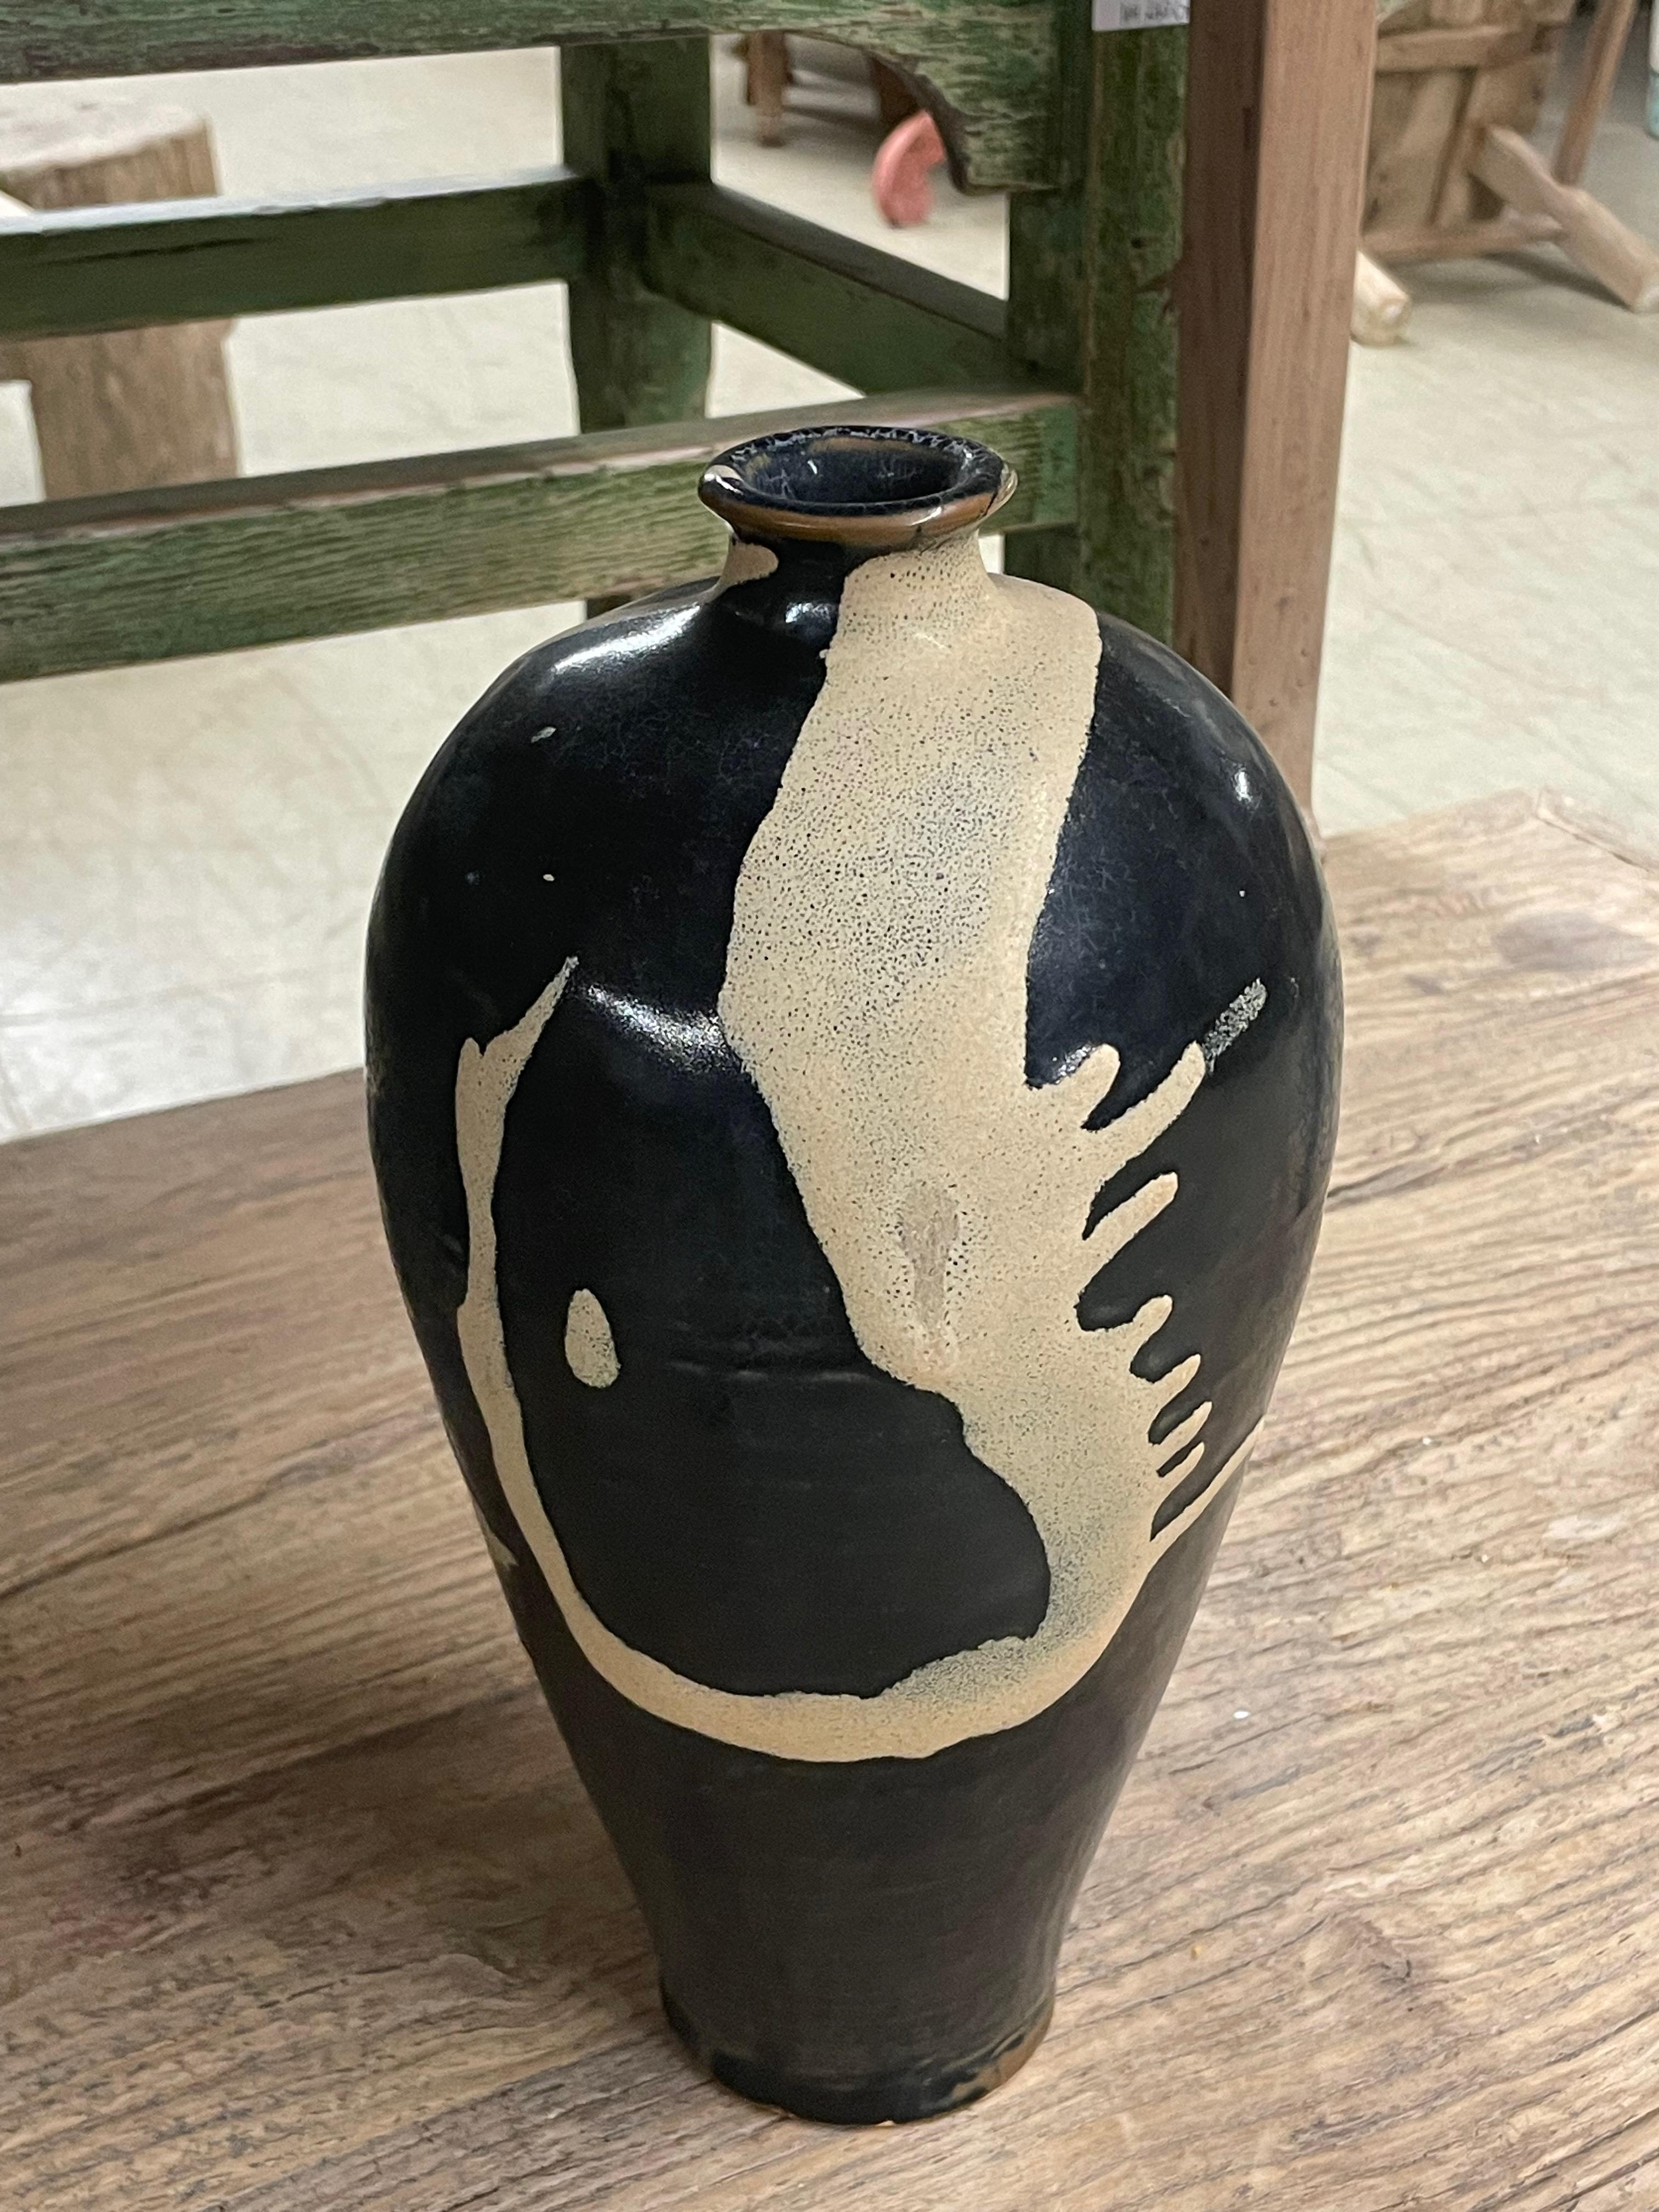 Contemporary Chinese black and cream splattered glaze tall vase.
Round shape with lip.
Sets nicely with shorter version S6488.
Can hold water.